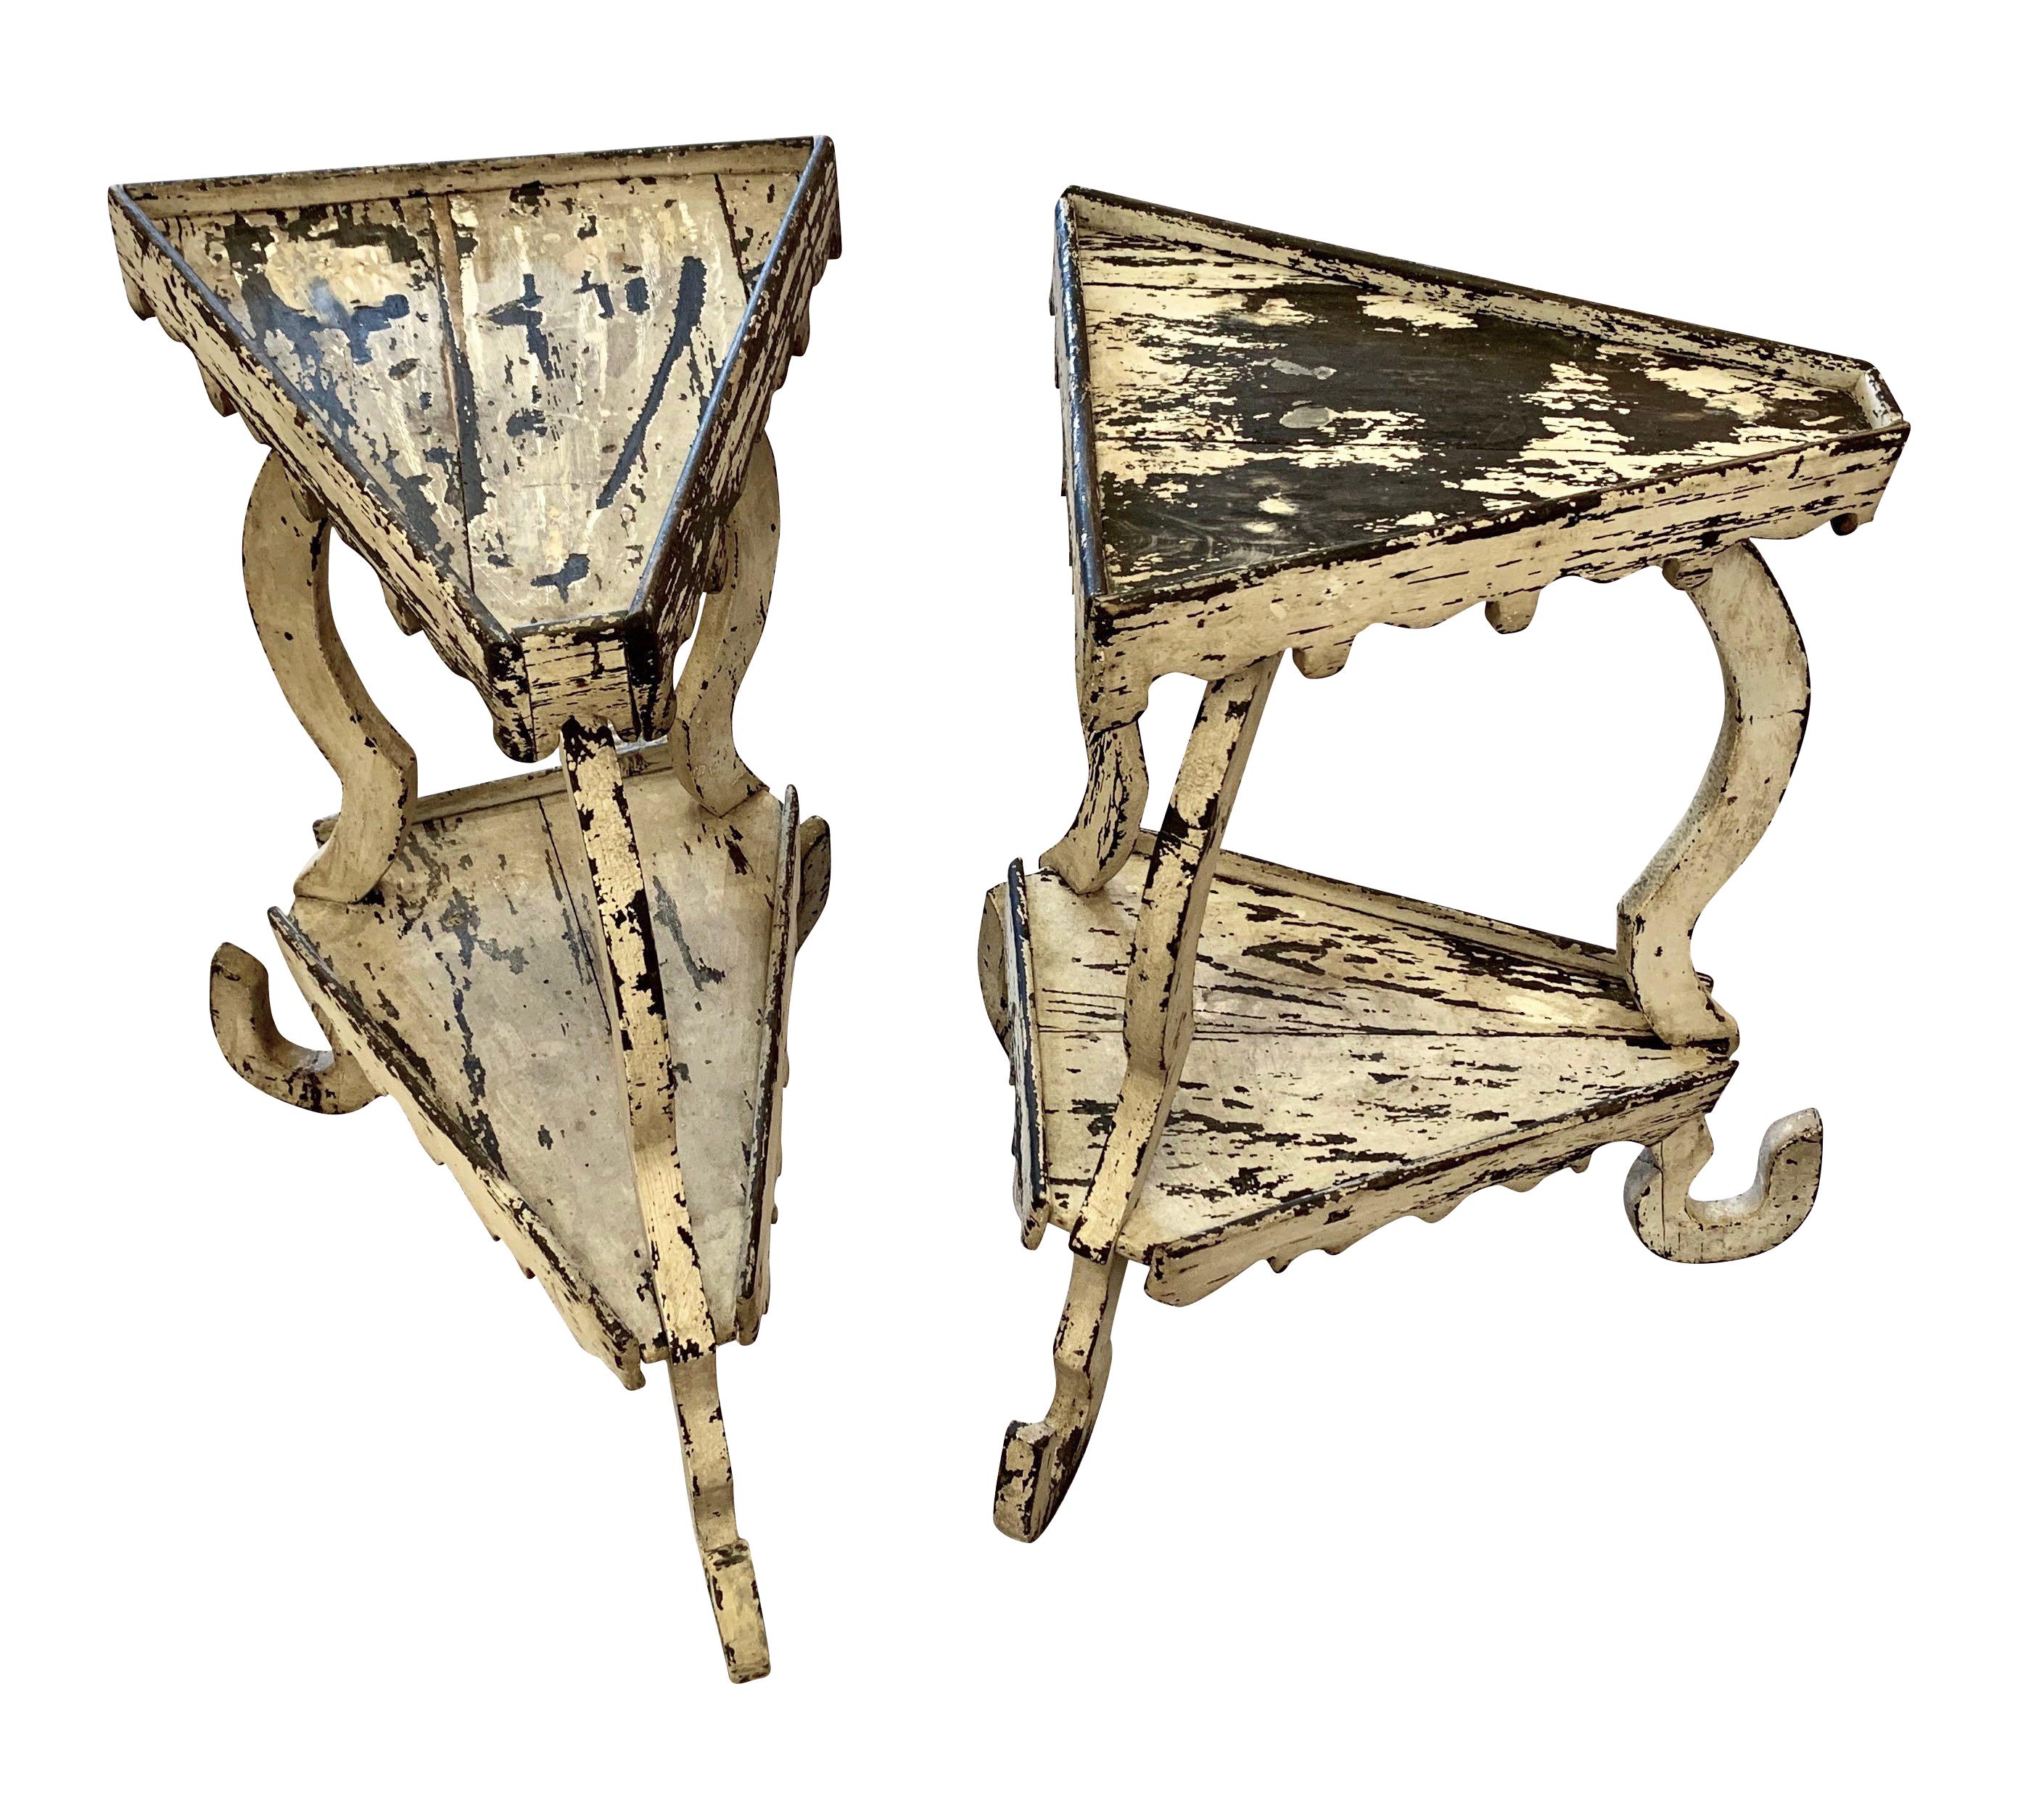 Unusual pair of ornate 19th century Italian side tables.
Nice washed white patina.